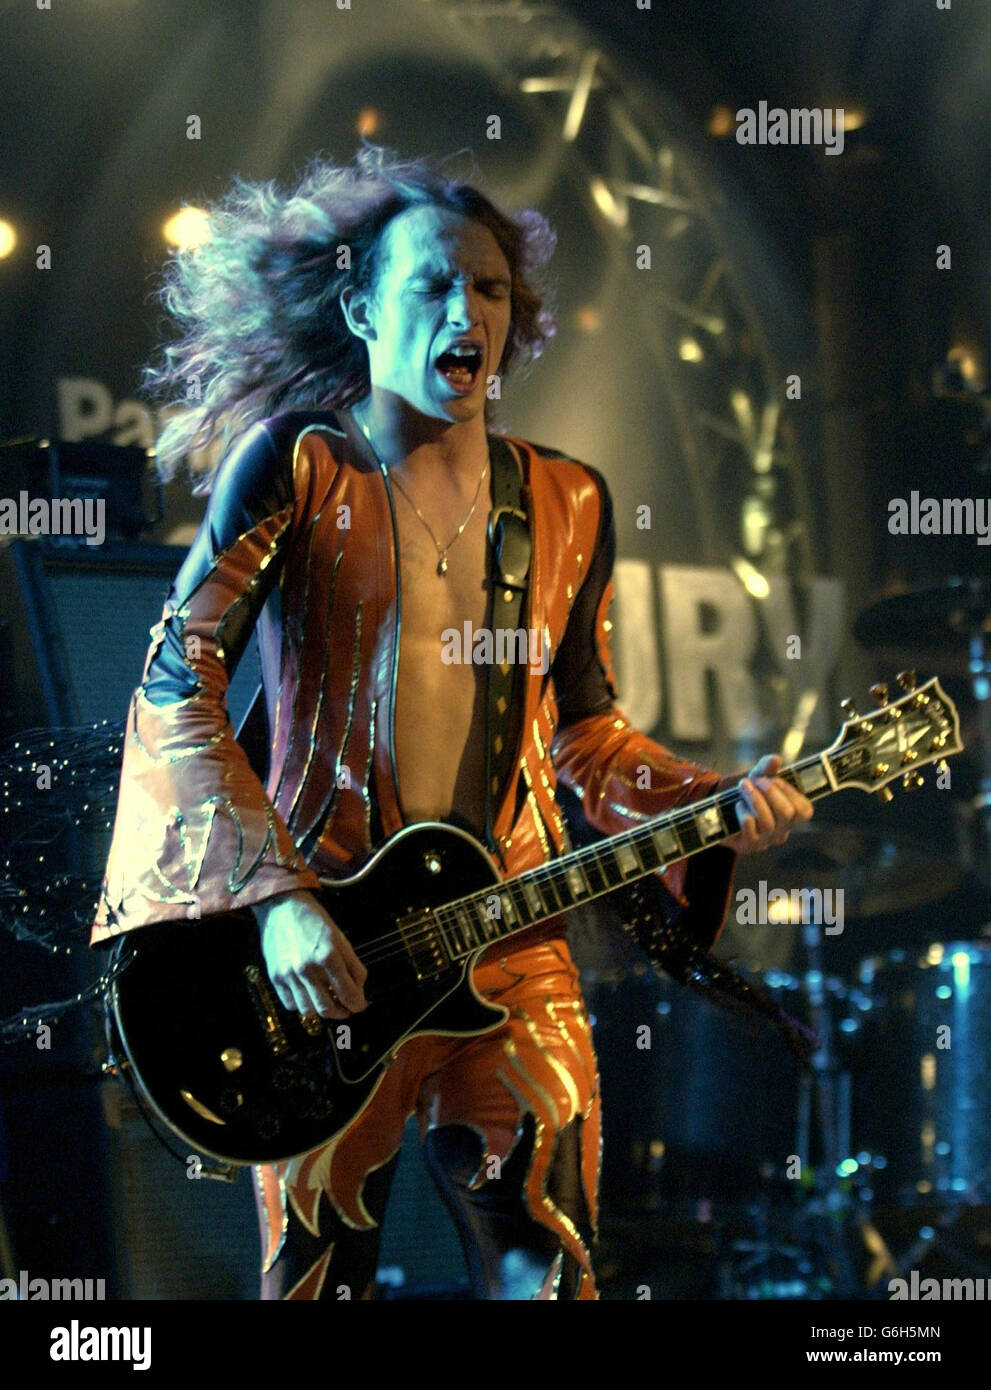 Justin Hawkins of The Darkness performing on stage at the Panasonic Mercury Music Prize at the Grosvenor House Hotel in central London. Stock Photo